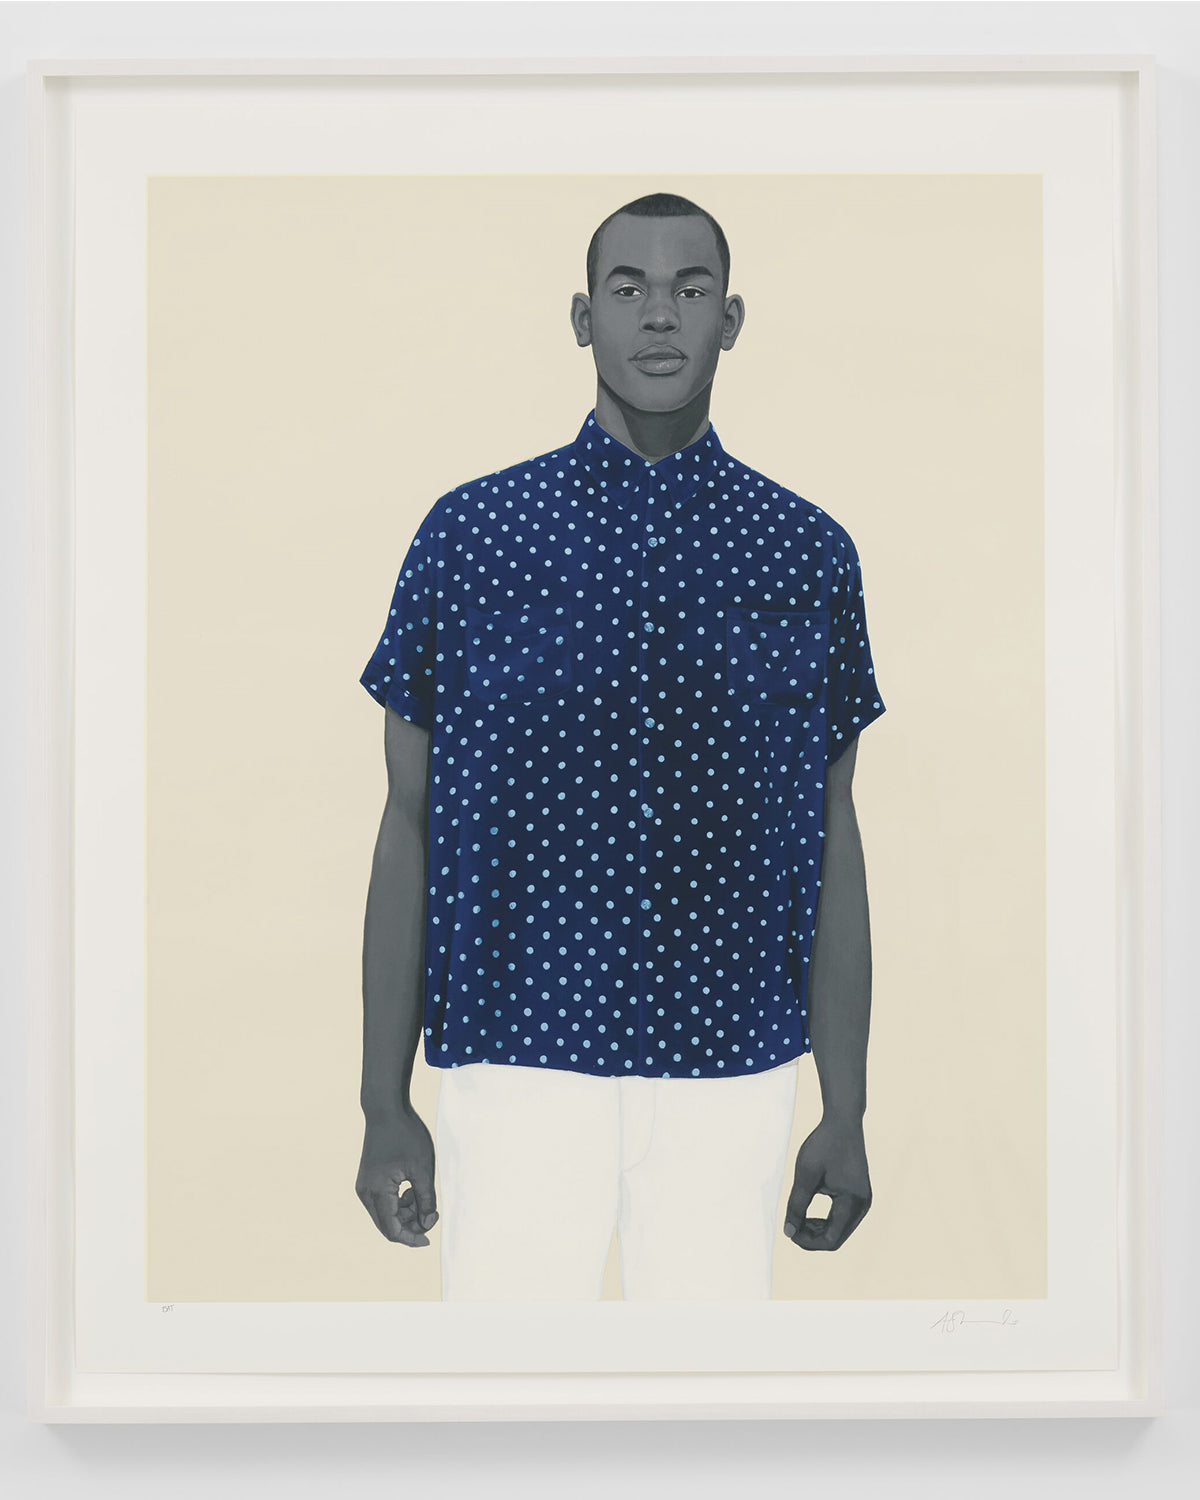 Amy Sherald: Handsome